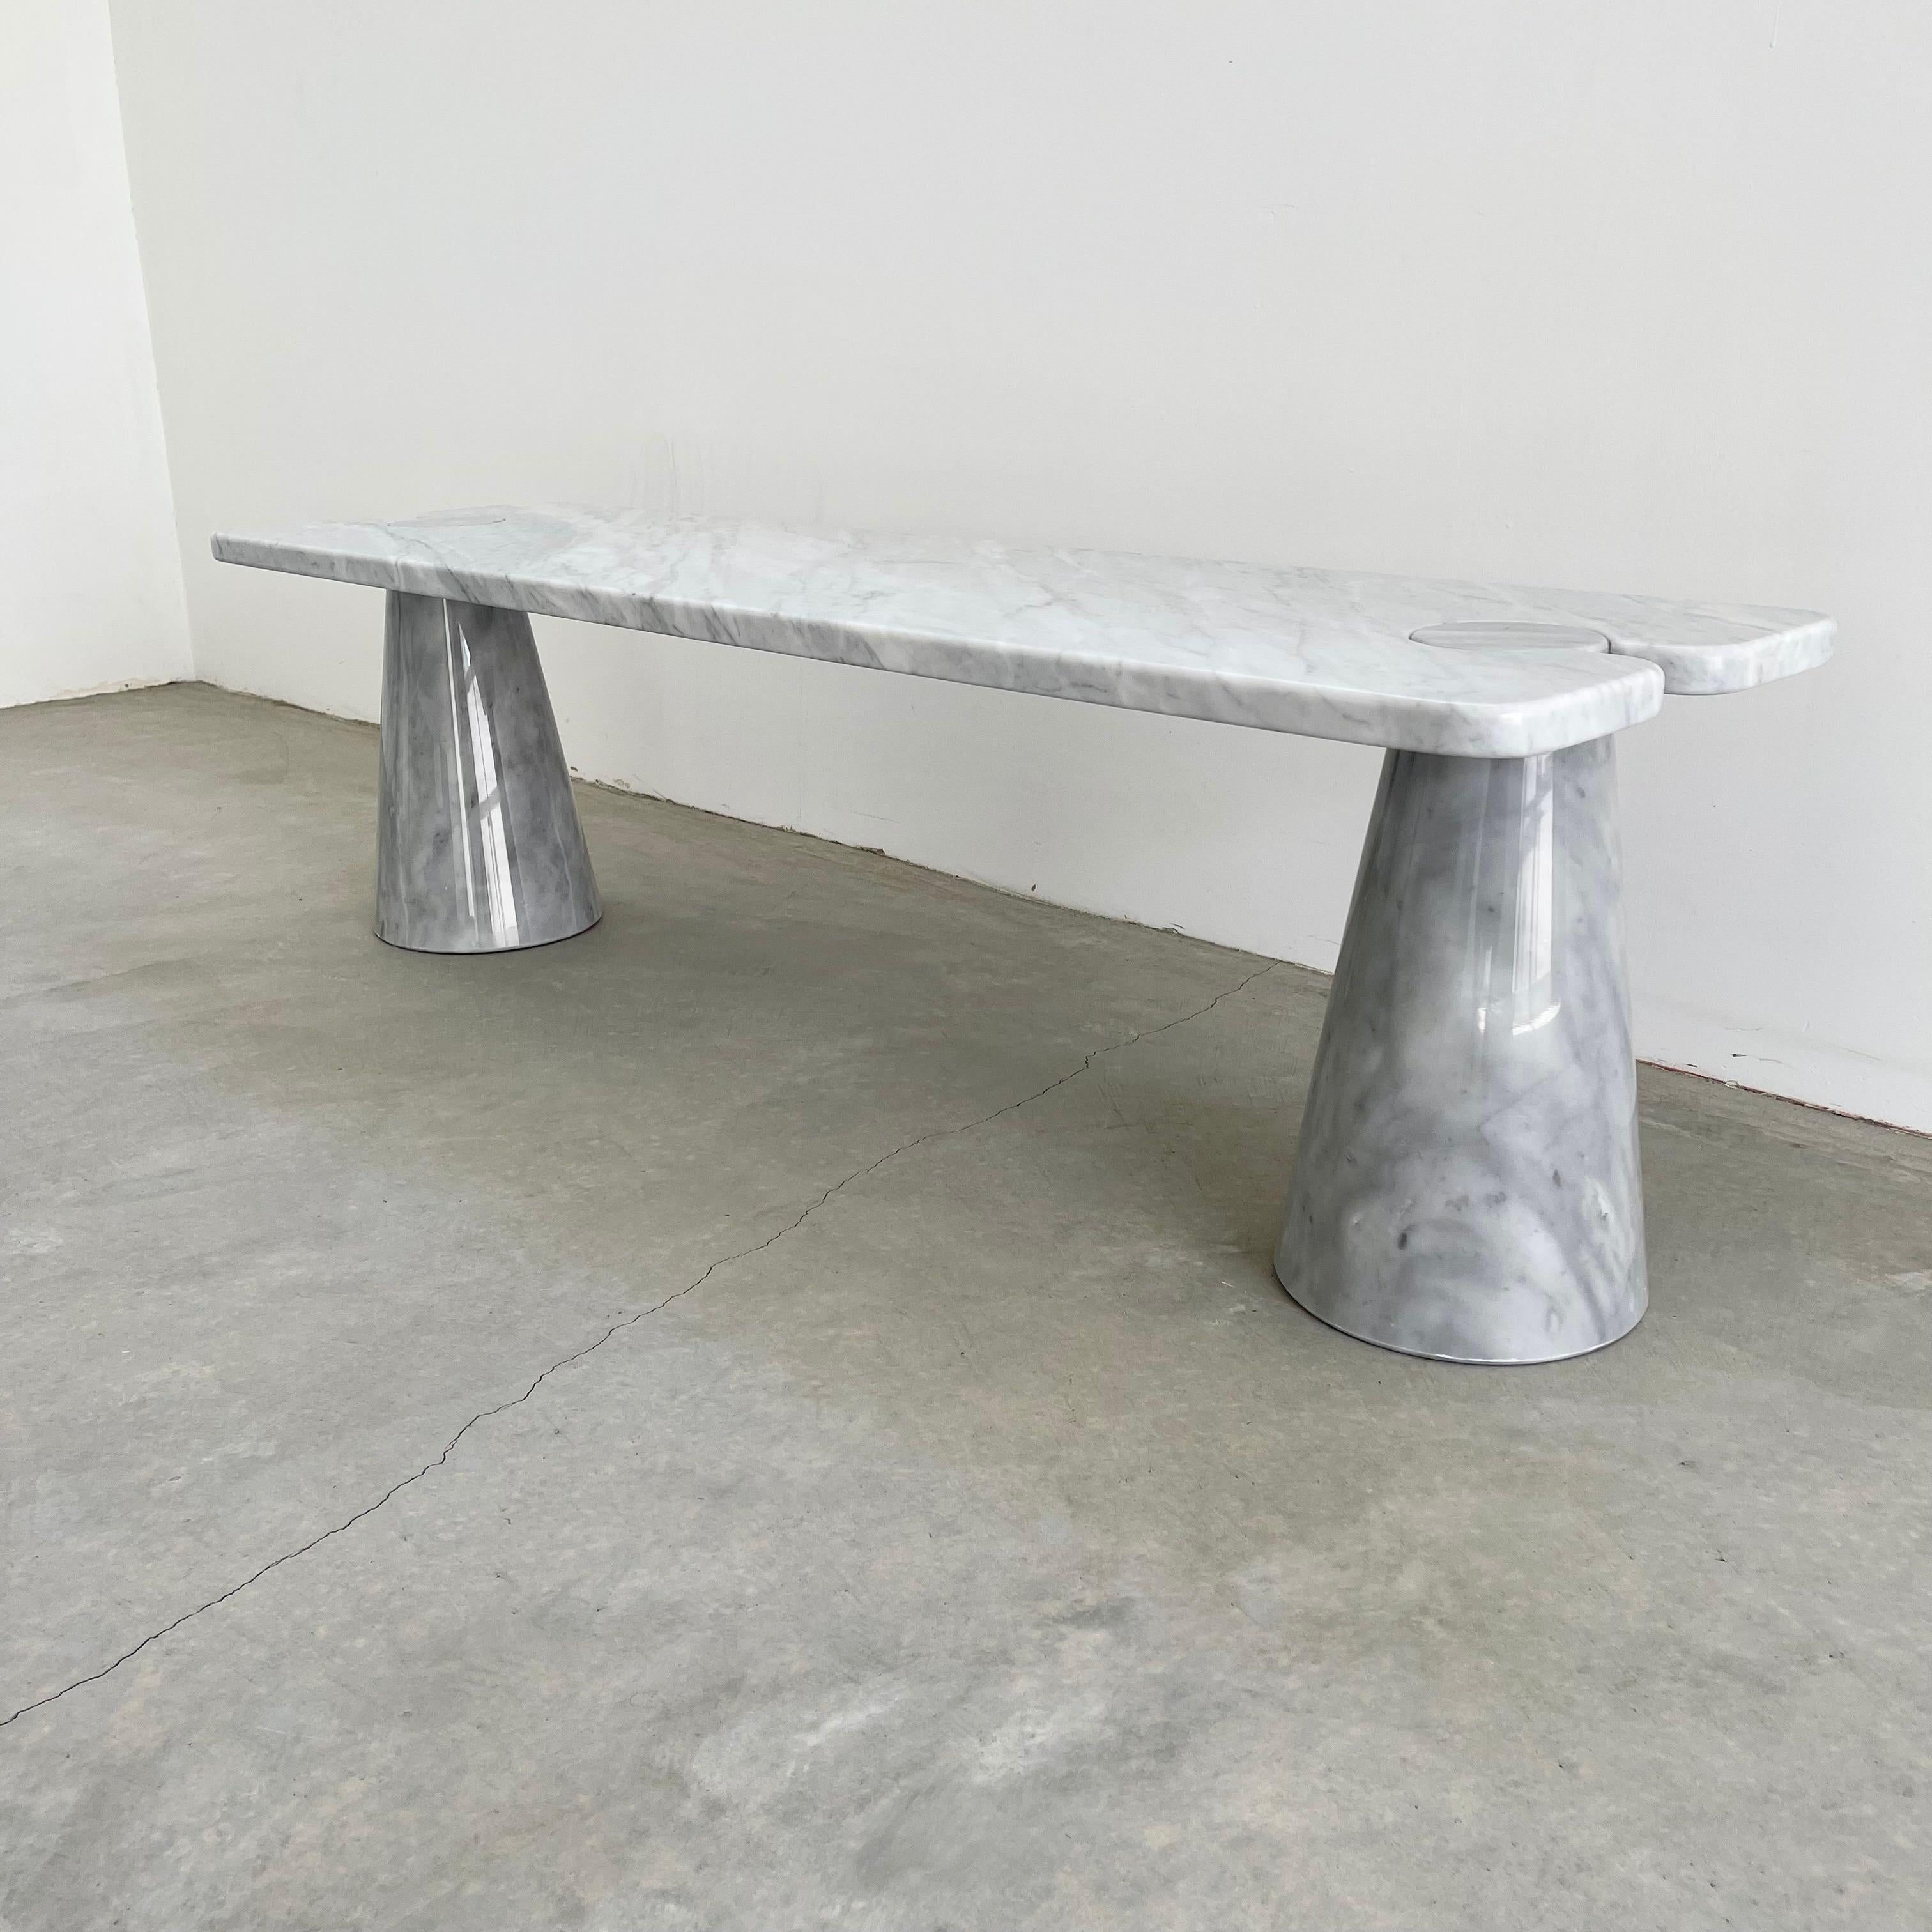 Stunning Carrara marble coffee table attributed to Angelo Mangiarotti. Large cone shaped bases hold a large slab of marble with circular cut outs. Extremely heavy and well made. Strong enough to be used as a bench if desired. White and blue/grey